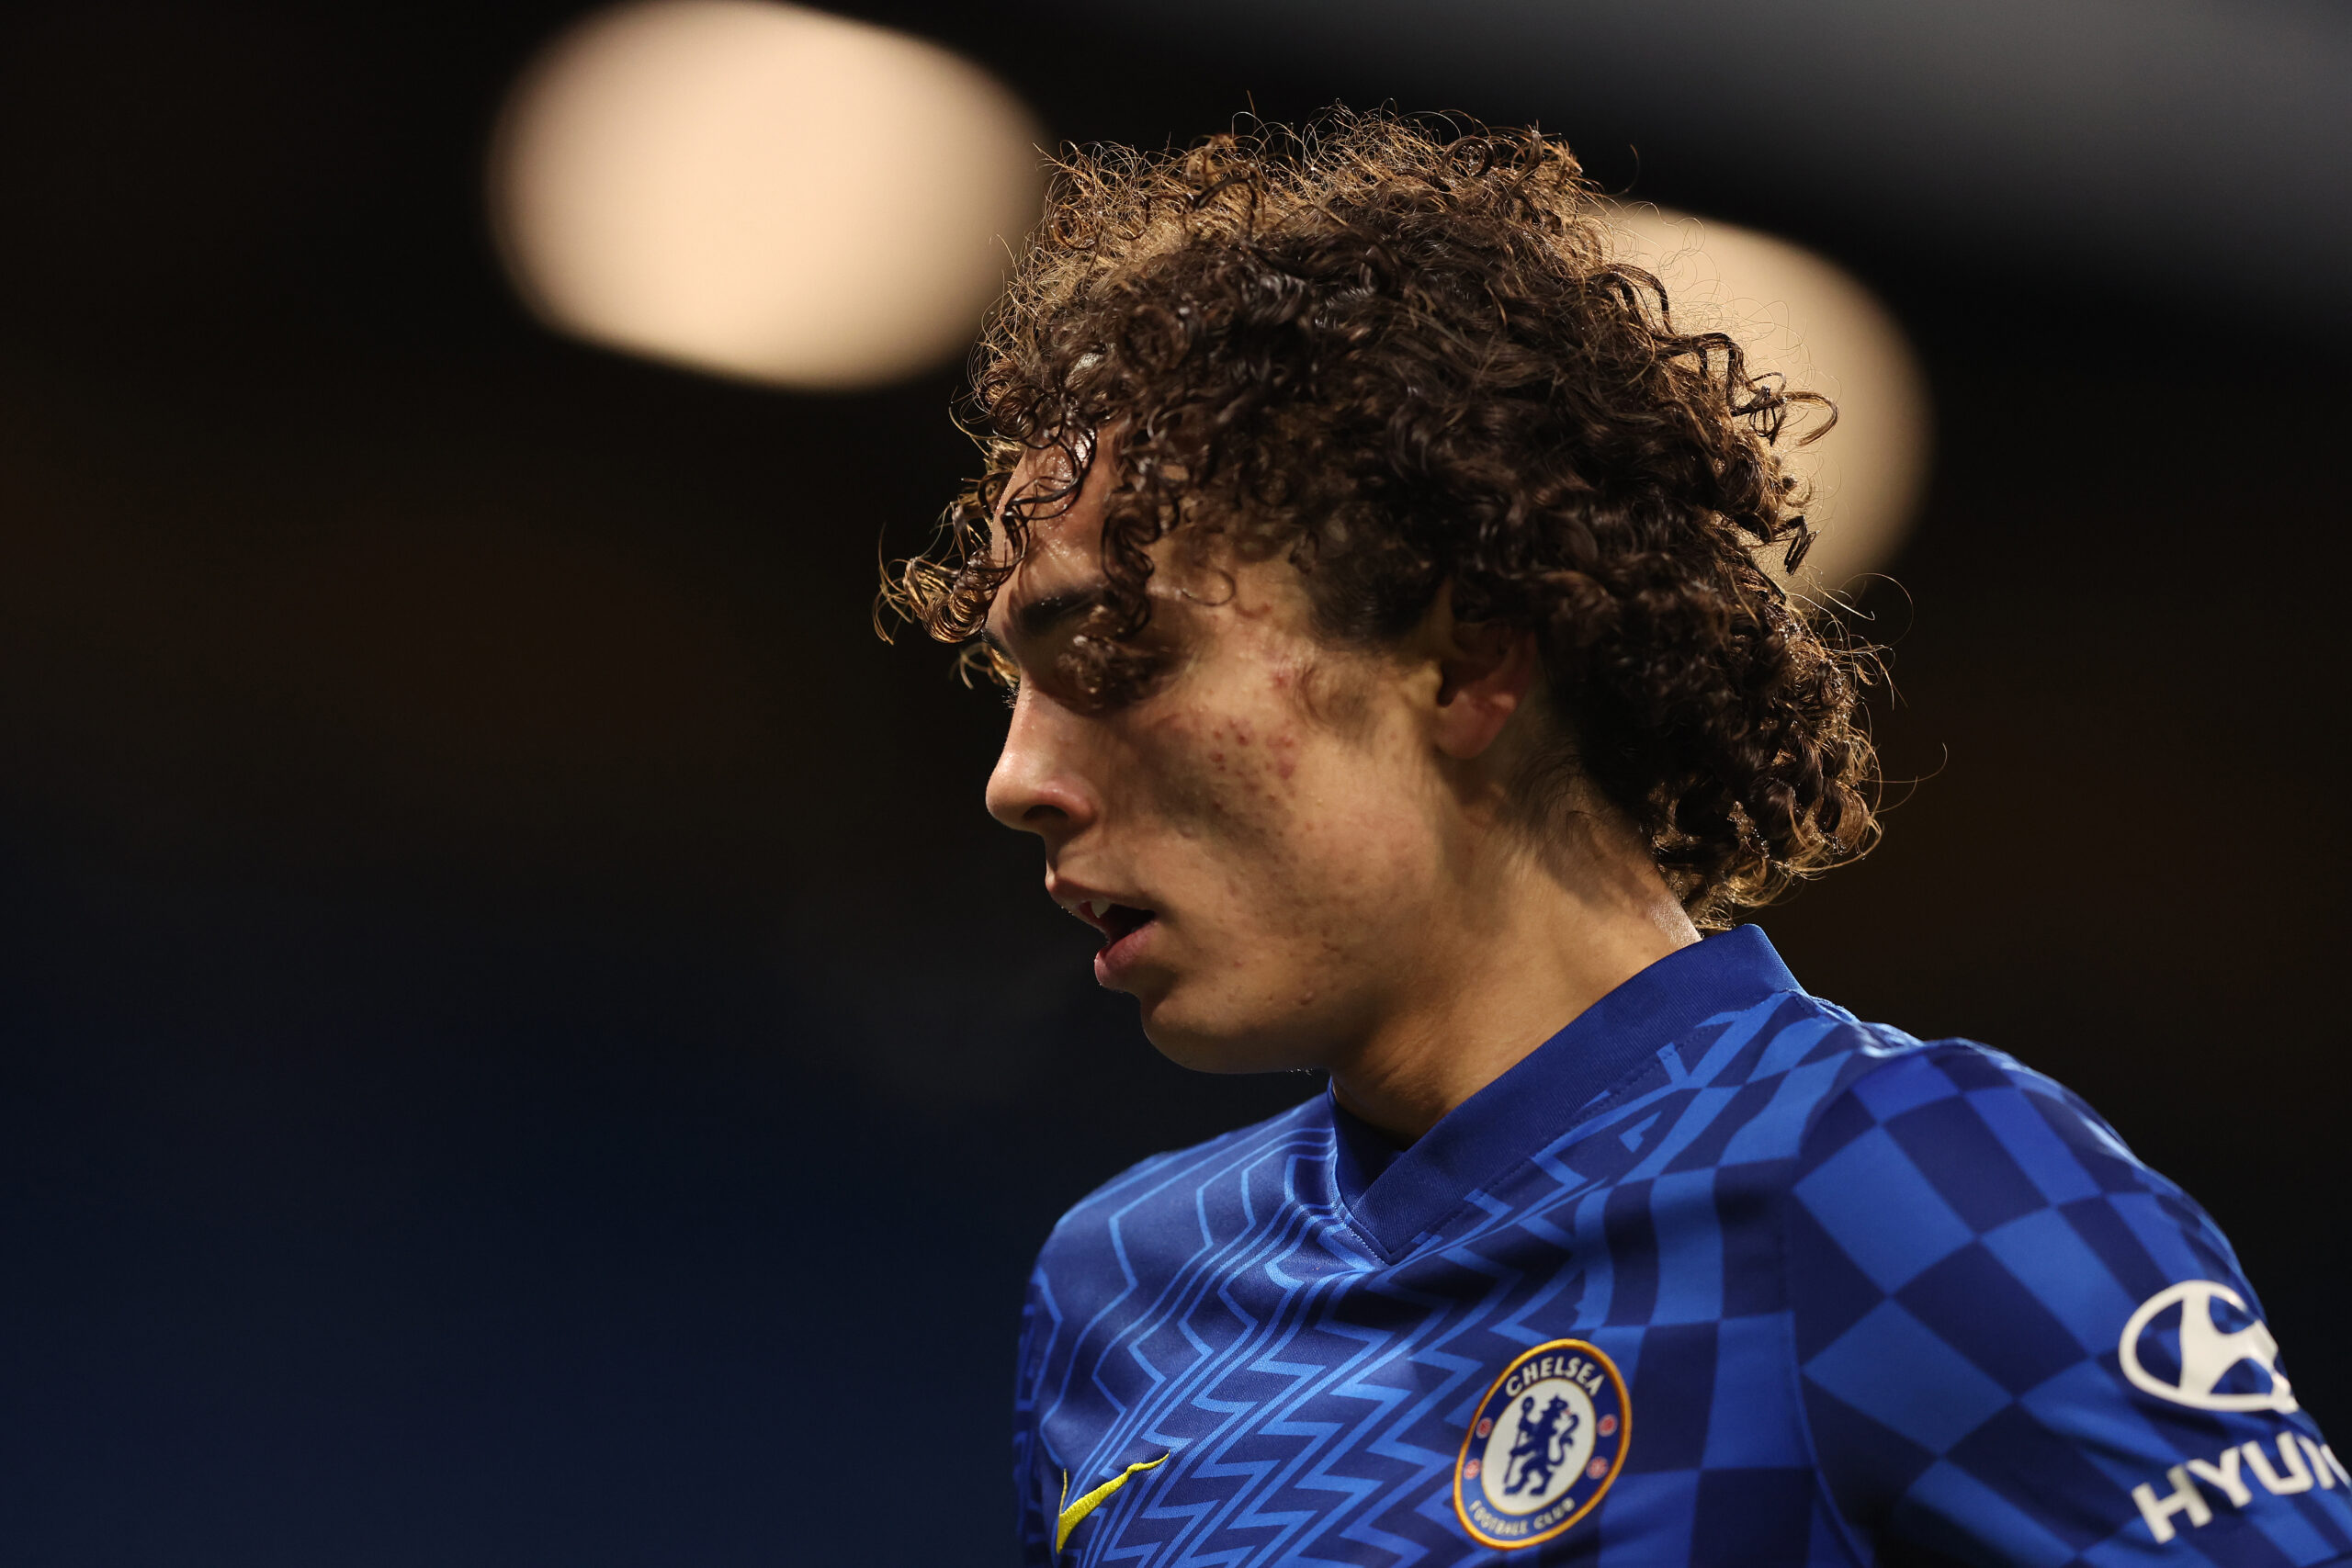 20-year-old midfielder sends emotional message after ending 9-year Chelsea stint